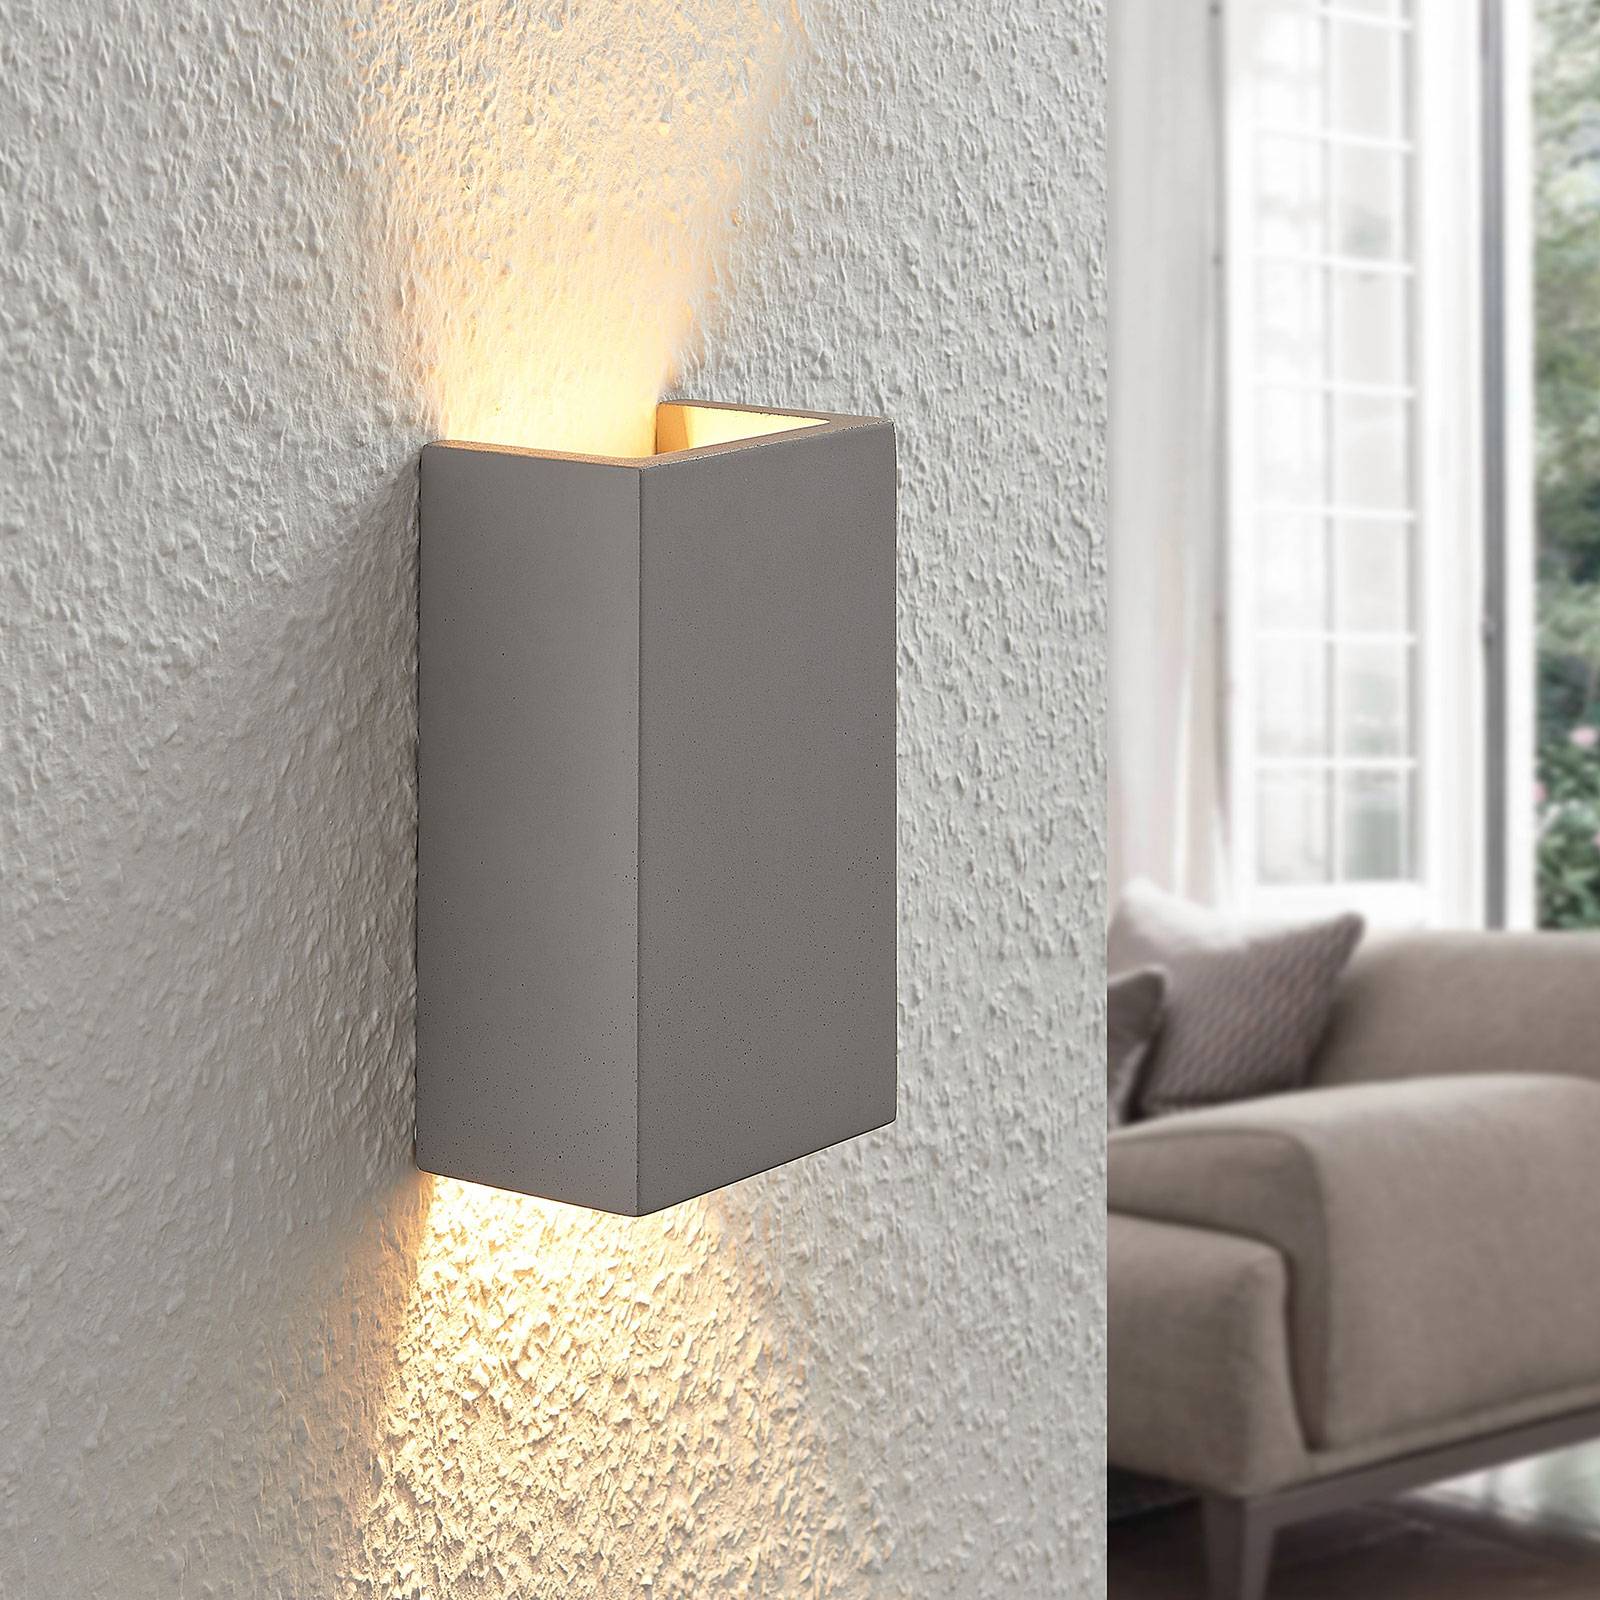 Photos - Chandelier / Lamp Lindby Smira concrete wall light in grey, 11 x 18 cm 